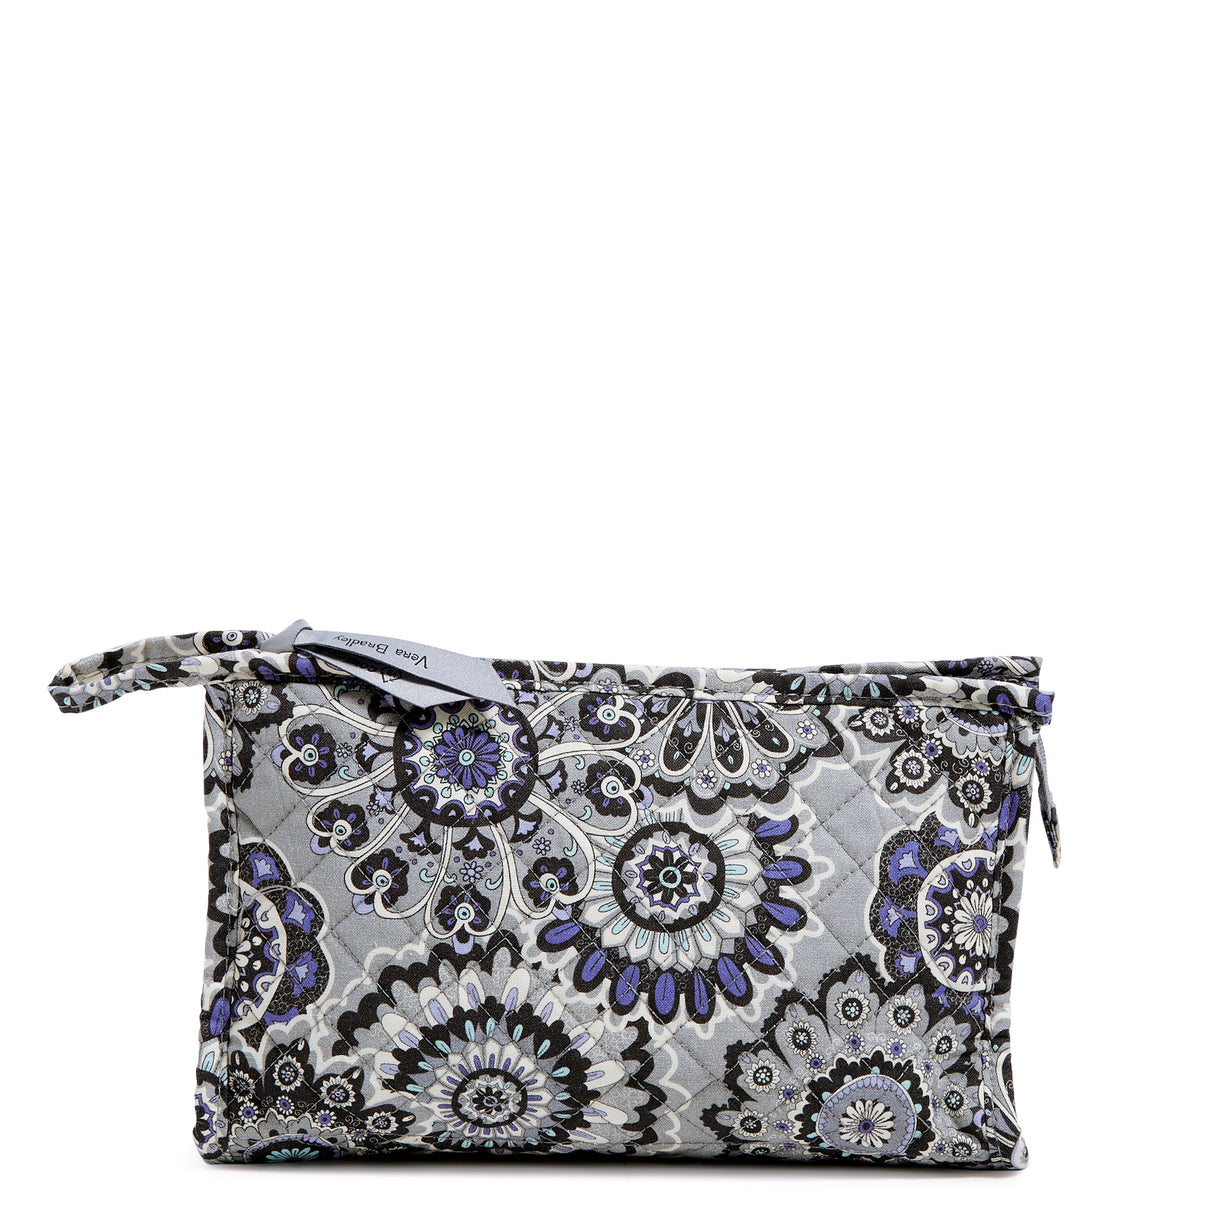 A Trapeze Cosmetic Bag in Tranquil Medallion.